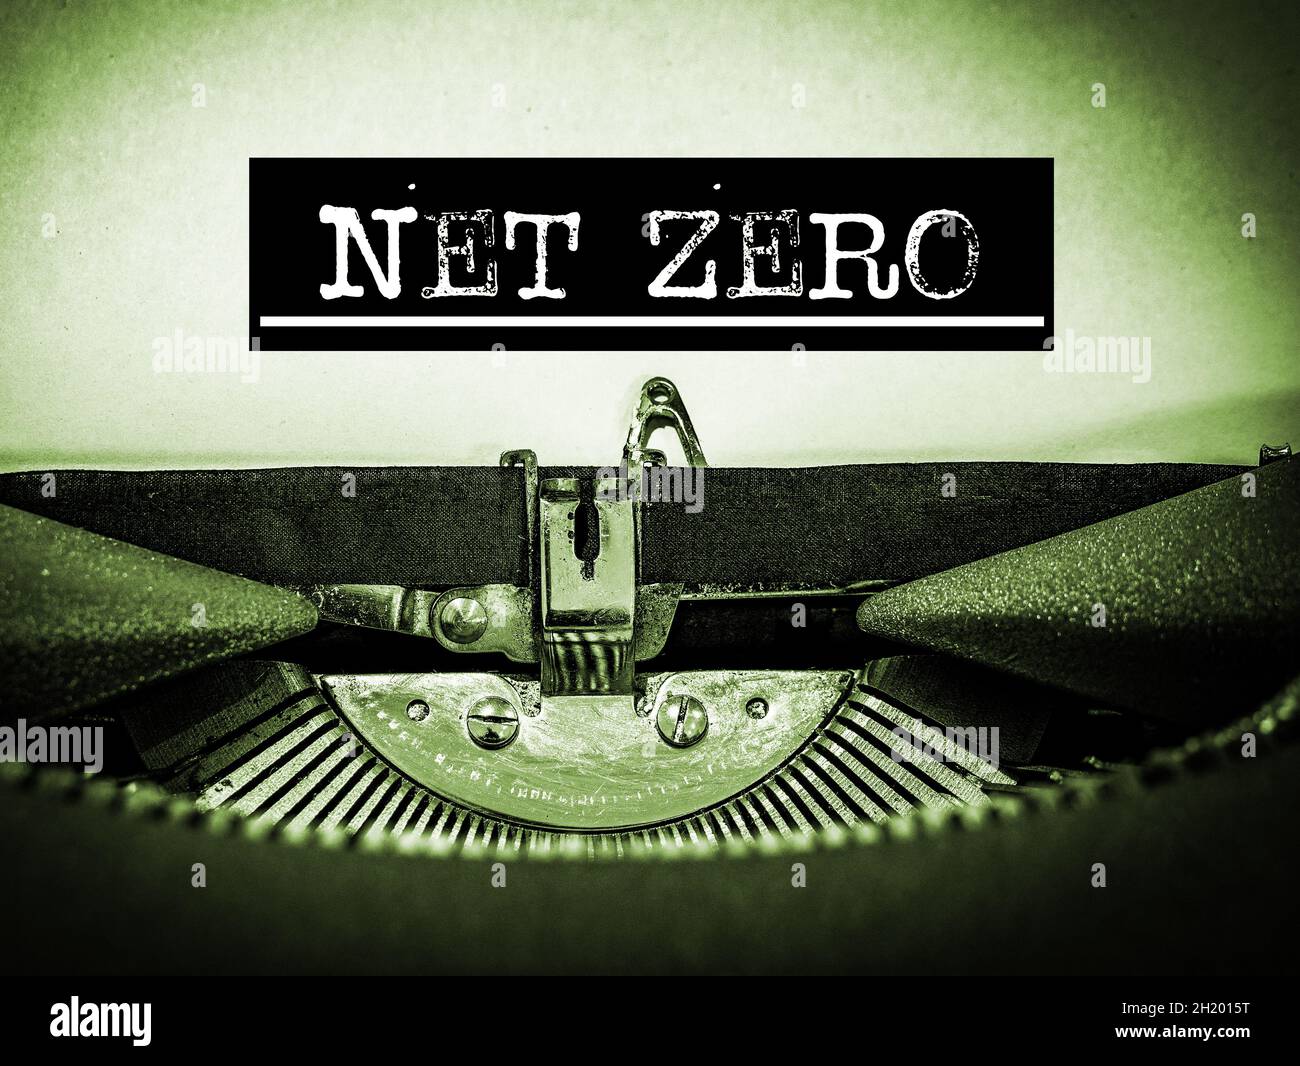 Net Zero displayed on a vintage typewriter with underline text and black border in a green tone Stock Photo